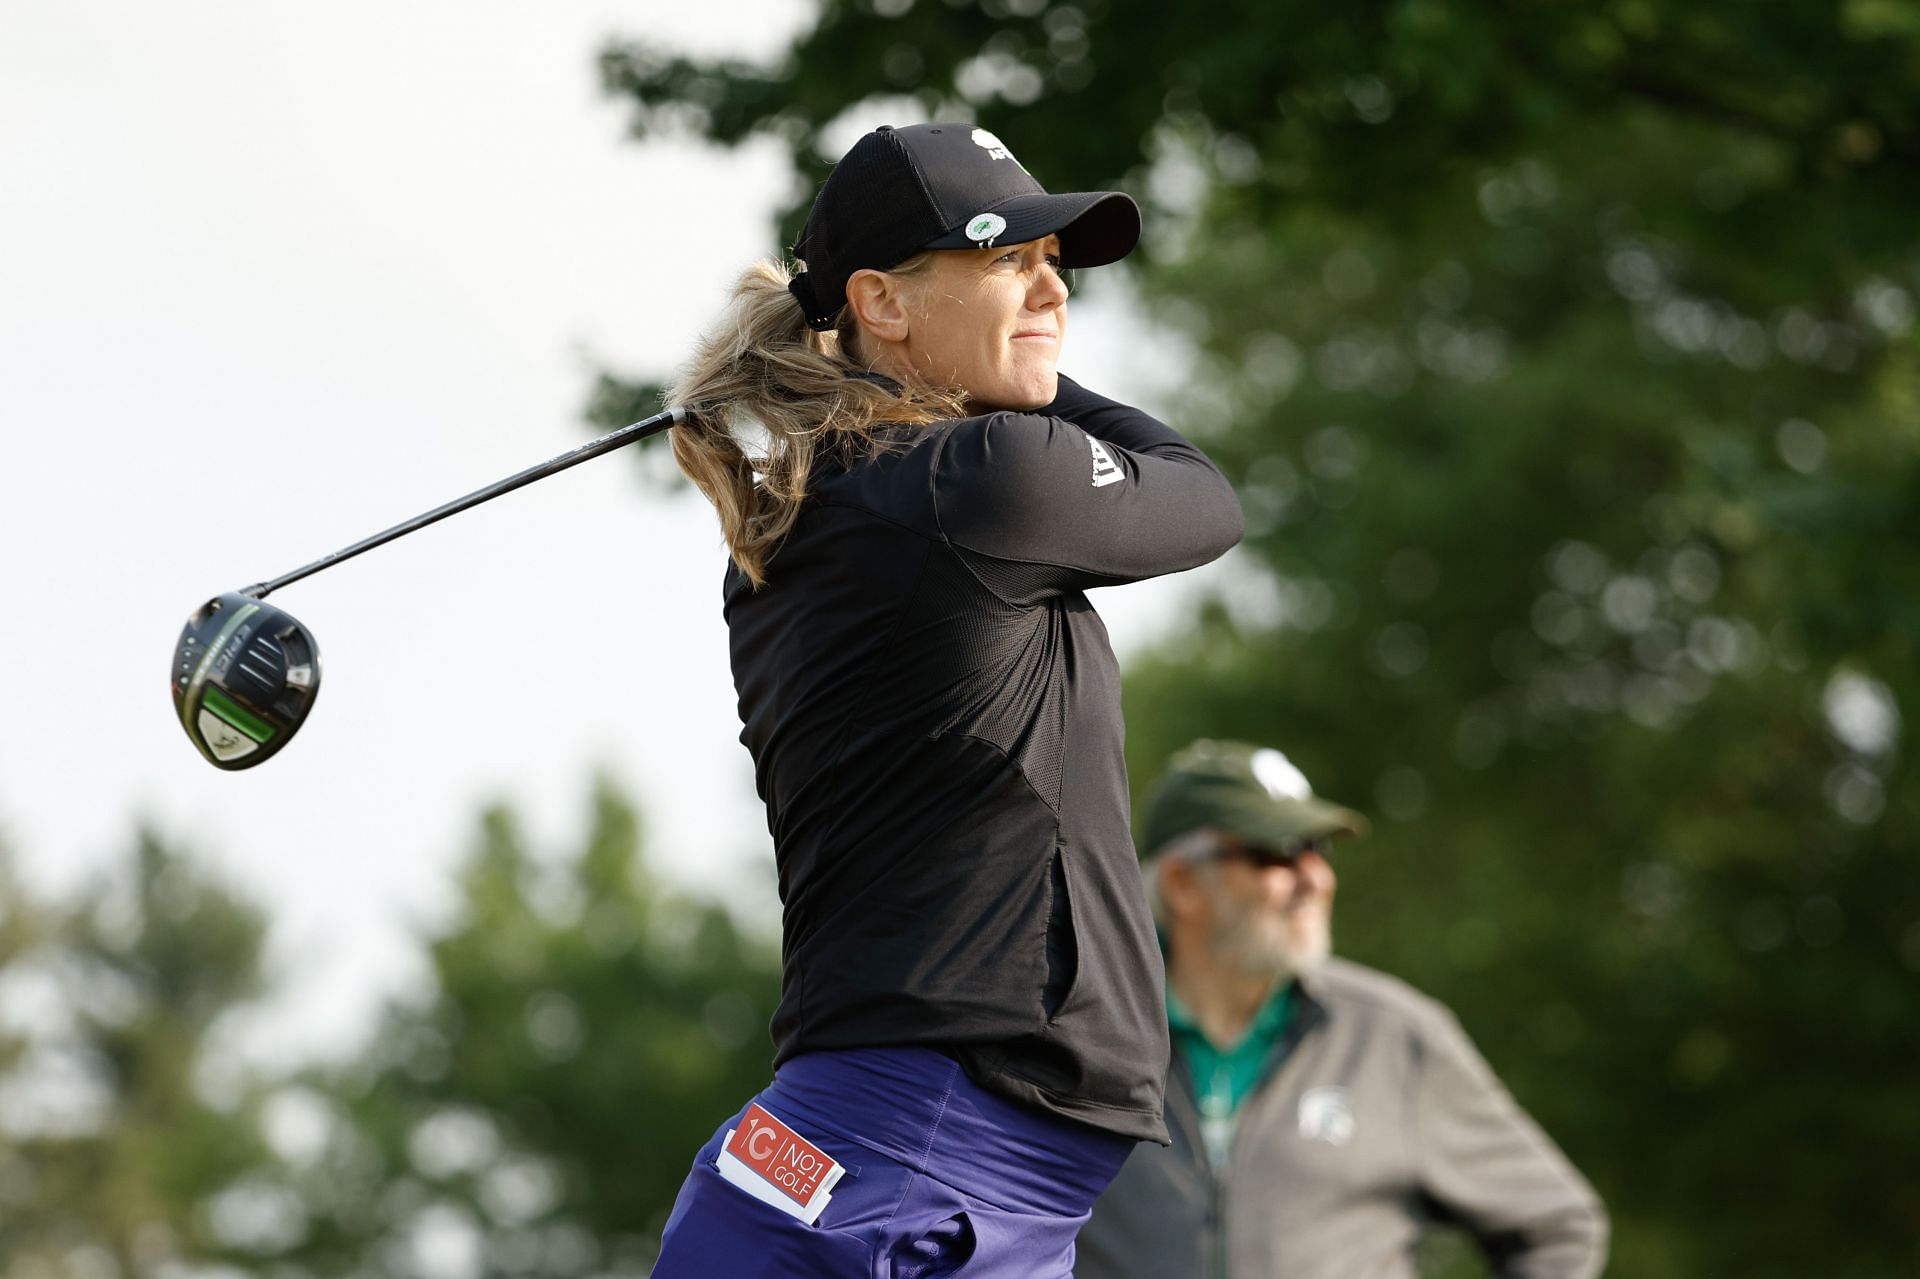 Meijer LPGA Classic for Simply Give - Round Two